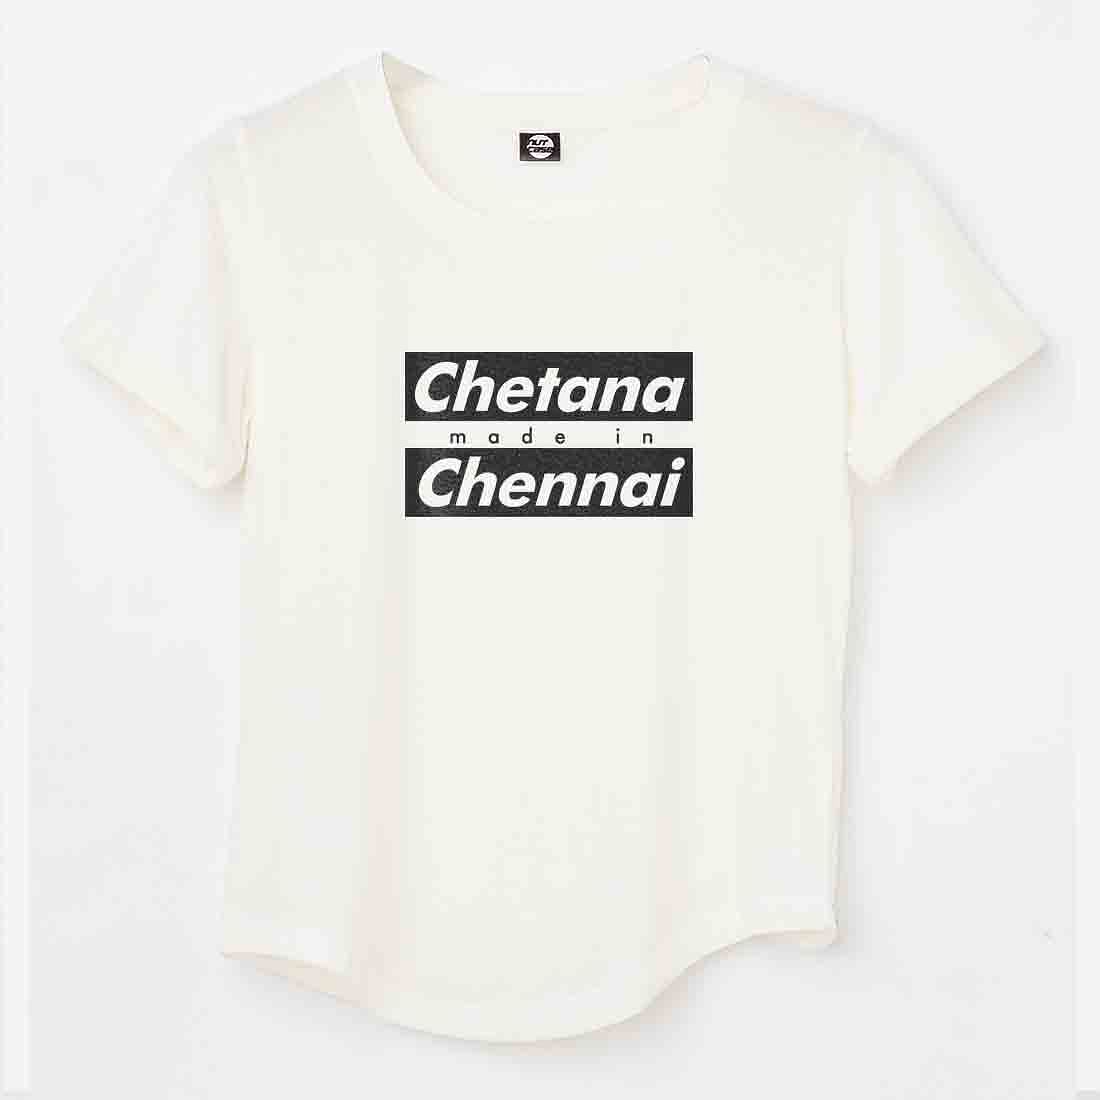 Customized Tshirts For Girls - Made in Chennai Nutcase